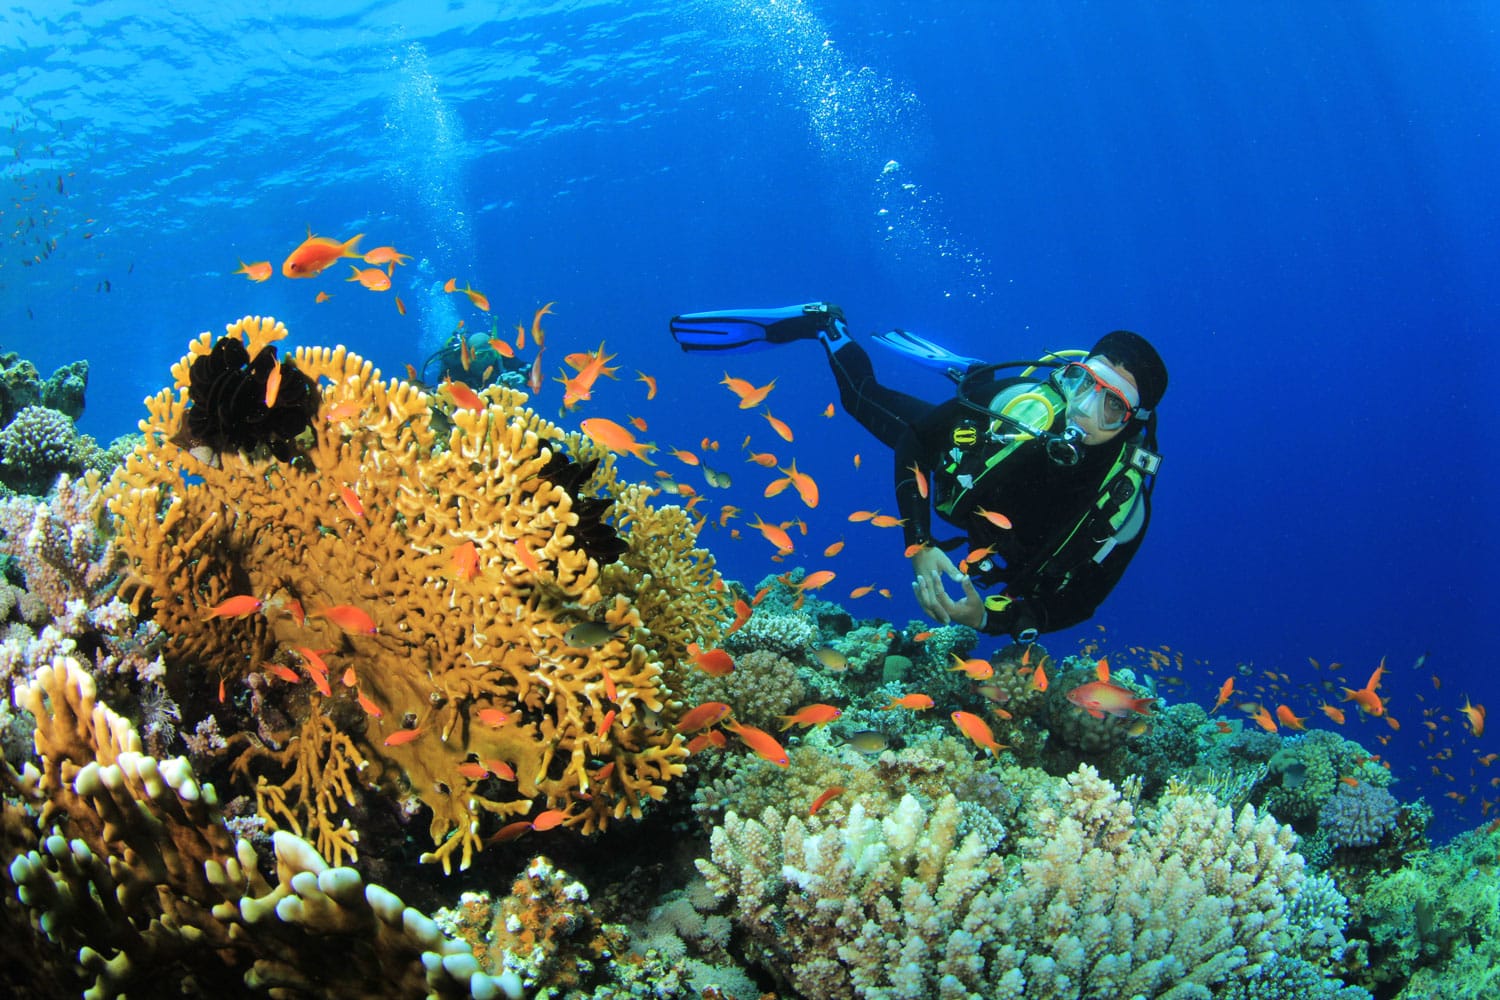 Scuba Diver, Tropical Fish and Coral Reef